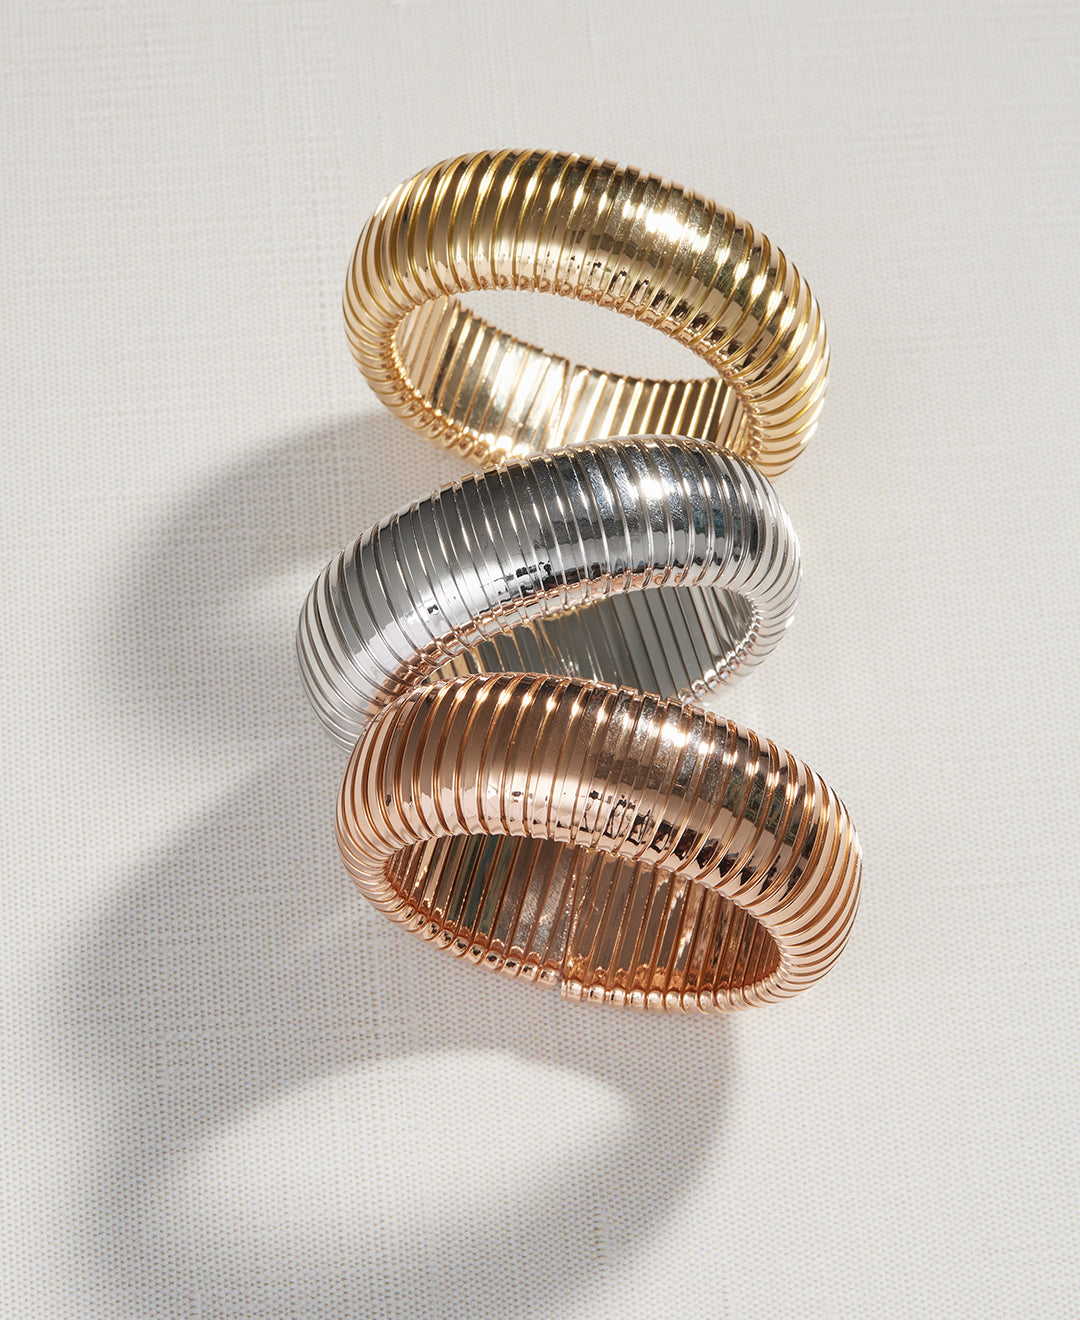 Three domed cuffs, one in yellow gold, one in white gold and one in rose gold are displayed on a white background.